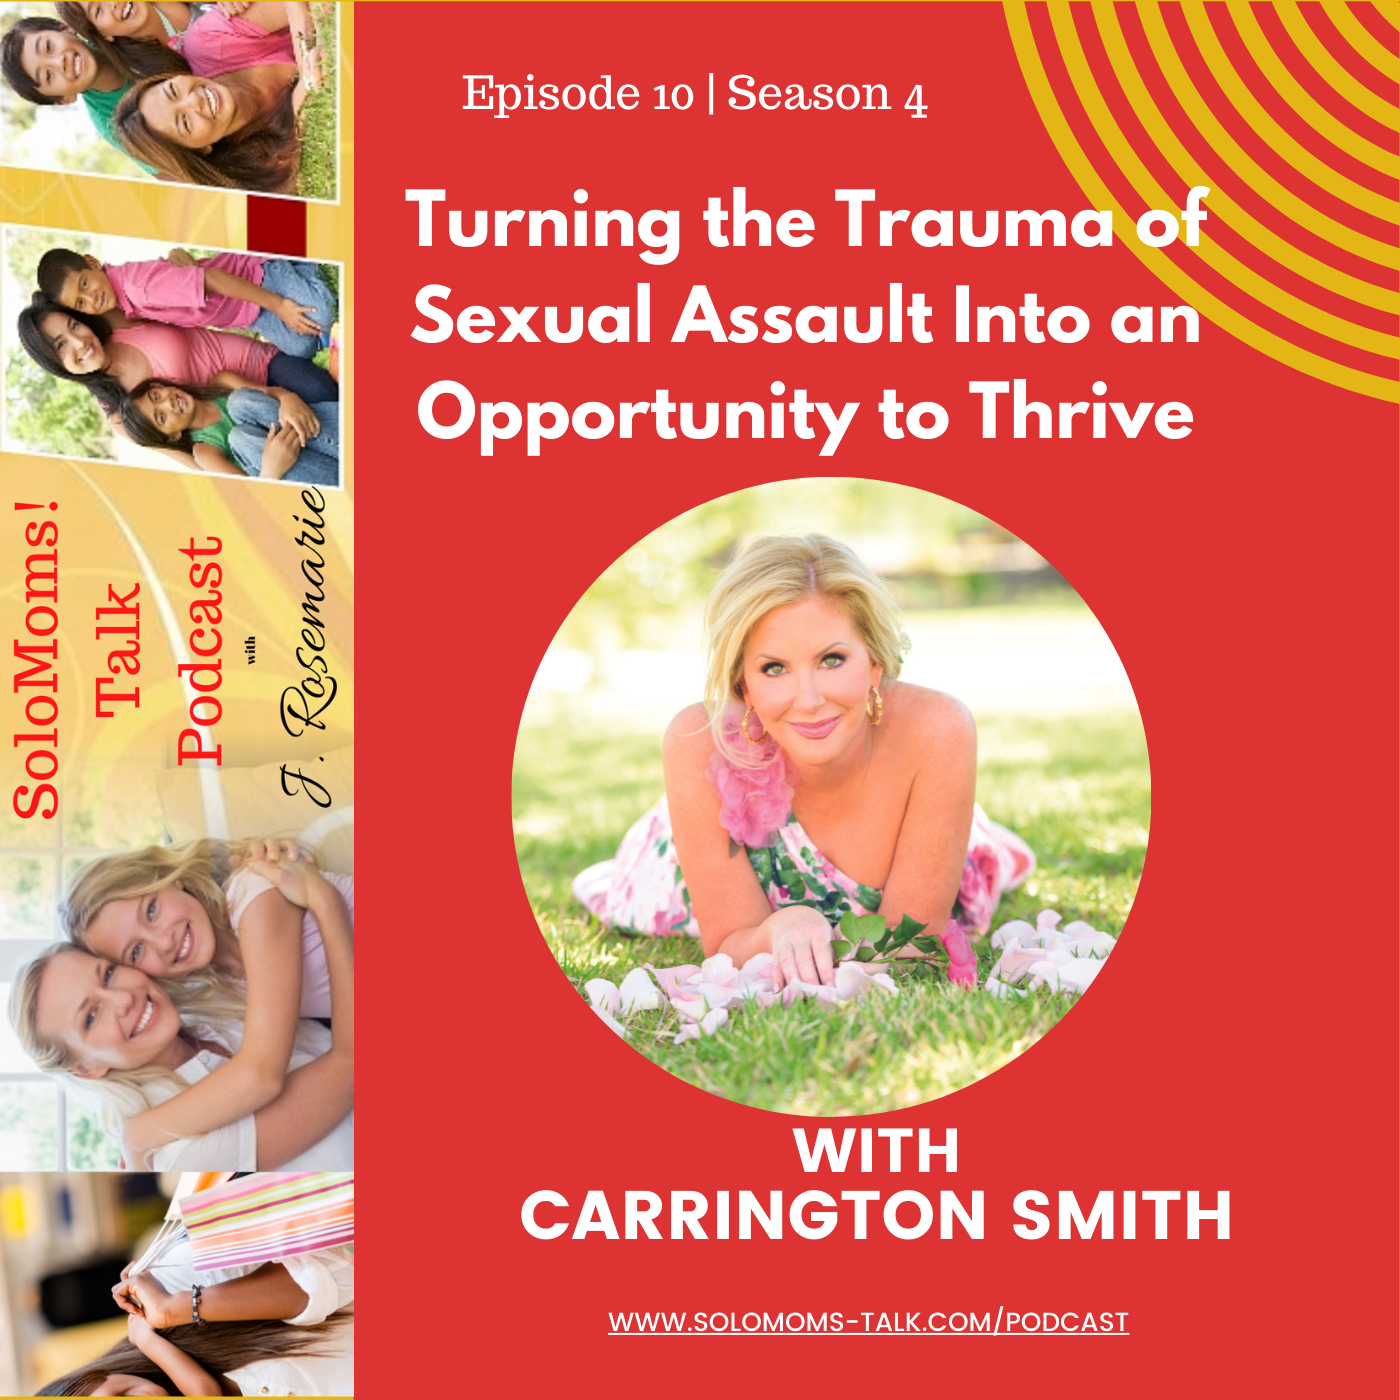 Turning the Trauma of Sexual Assault Into an Opportunity to Thrive - Carrington Smith